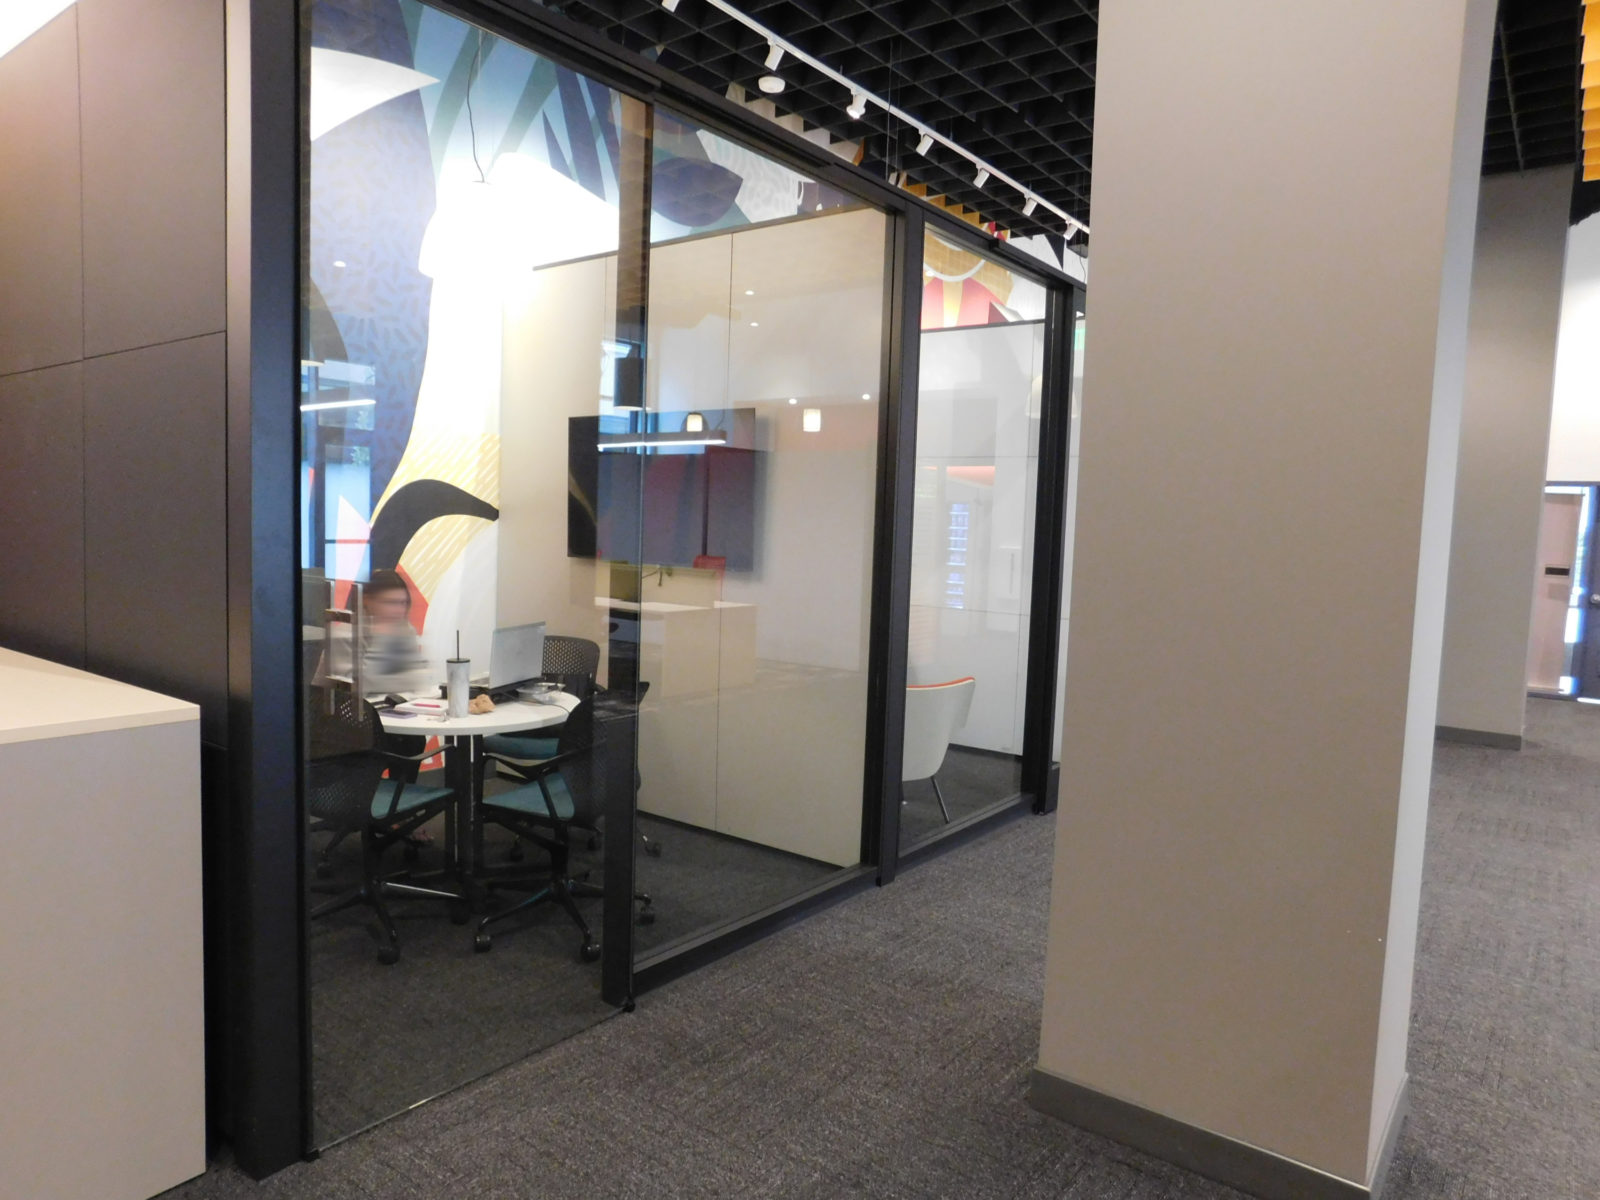 DIRTT modular wall solution: they have glass doors and wall on front with black trim; the rooms are separated by a fabric wall in between.